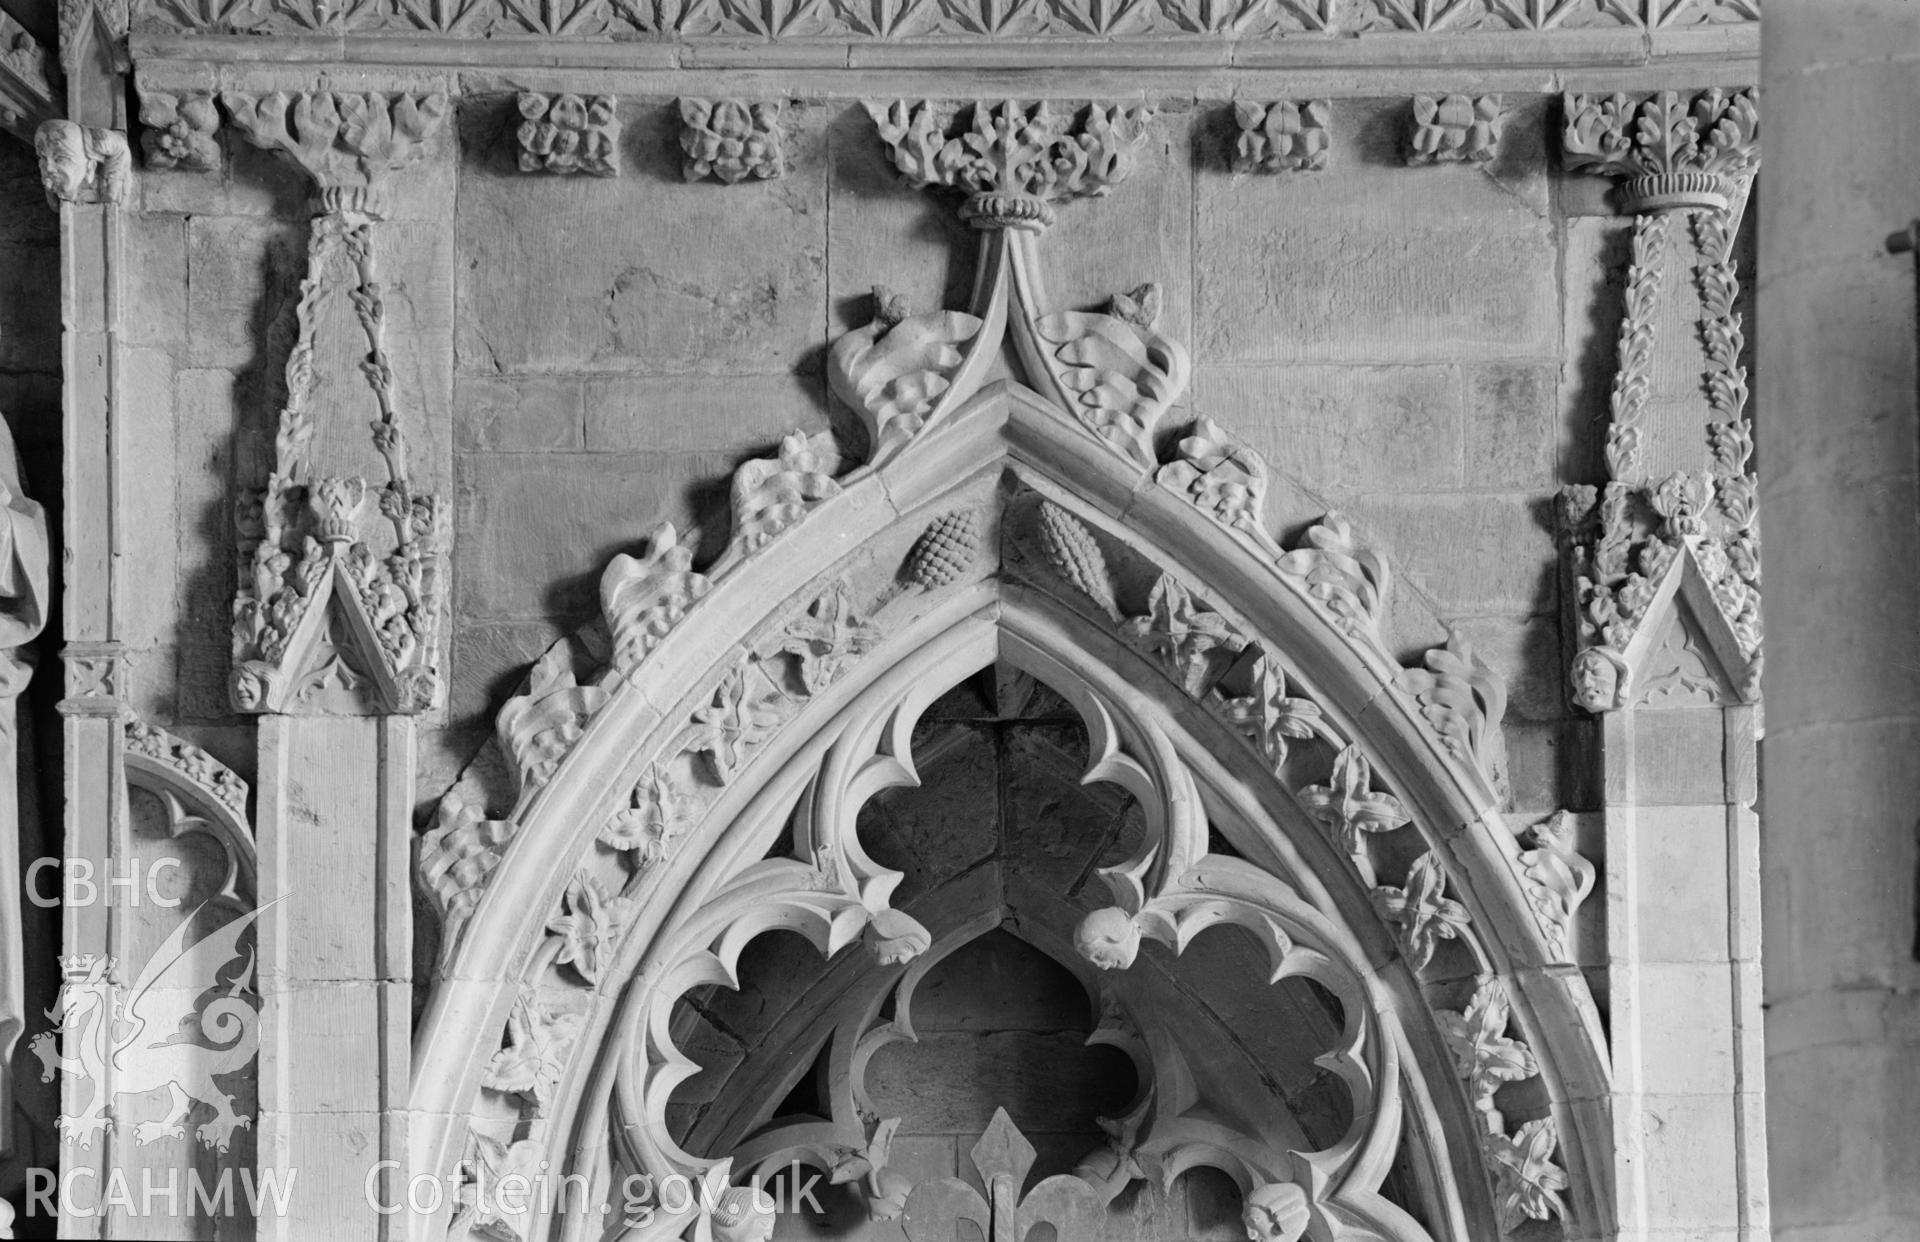 Digital copy of a black and white nitrate negative showing interior stonework decoration at St. David's Cathedral, taken by E.W. Lovegrove, July 1936.